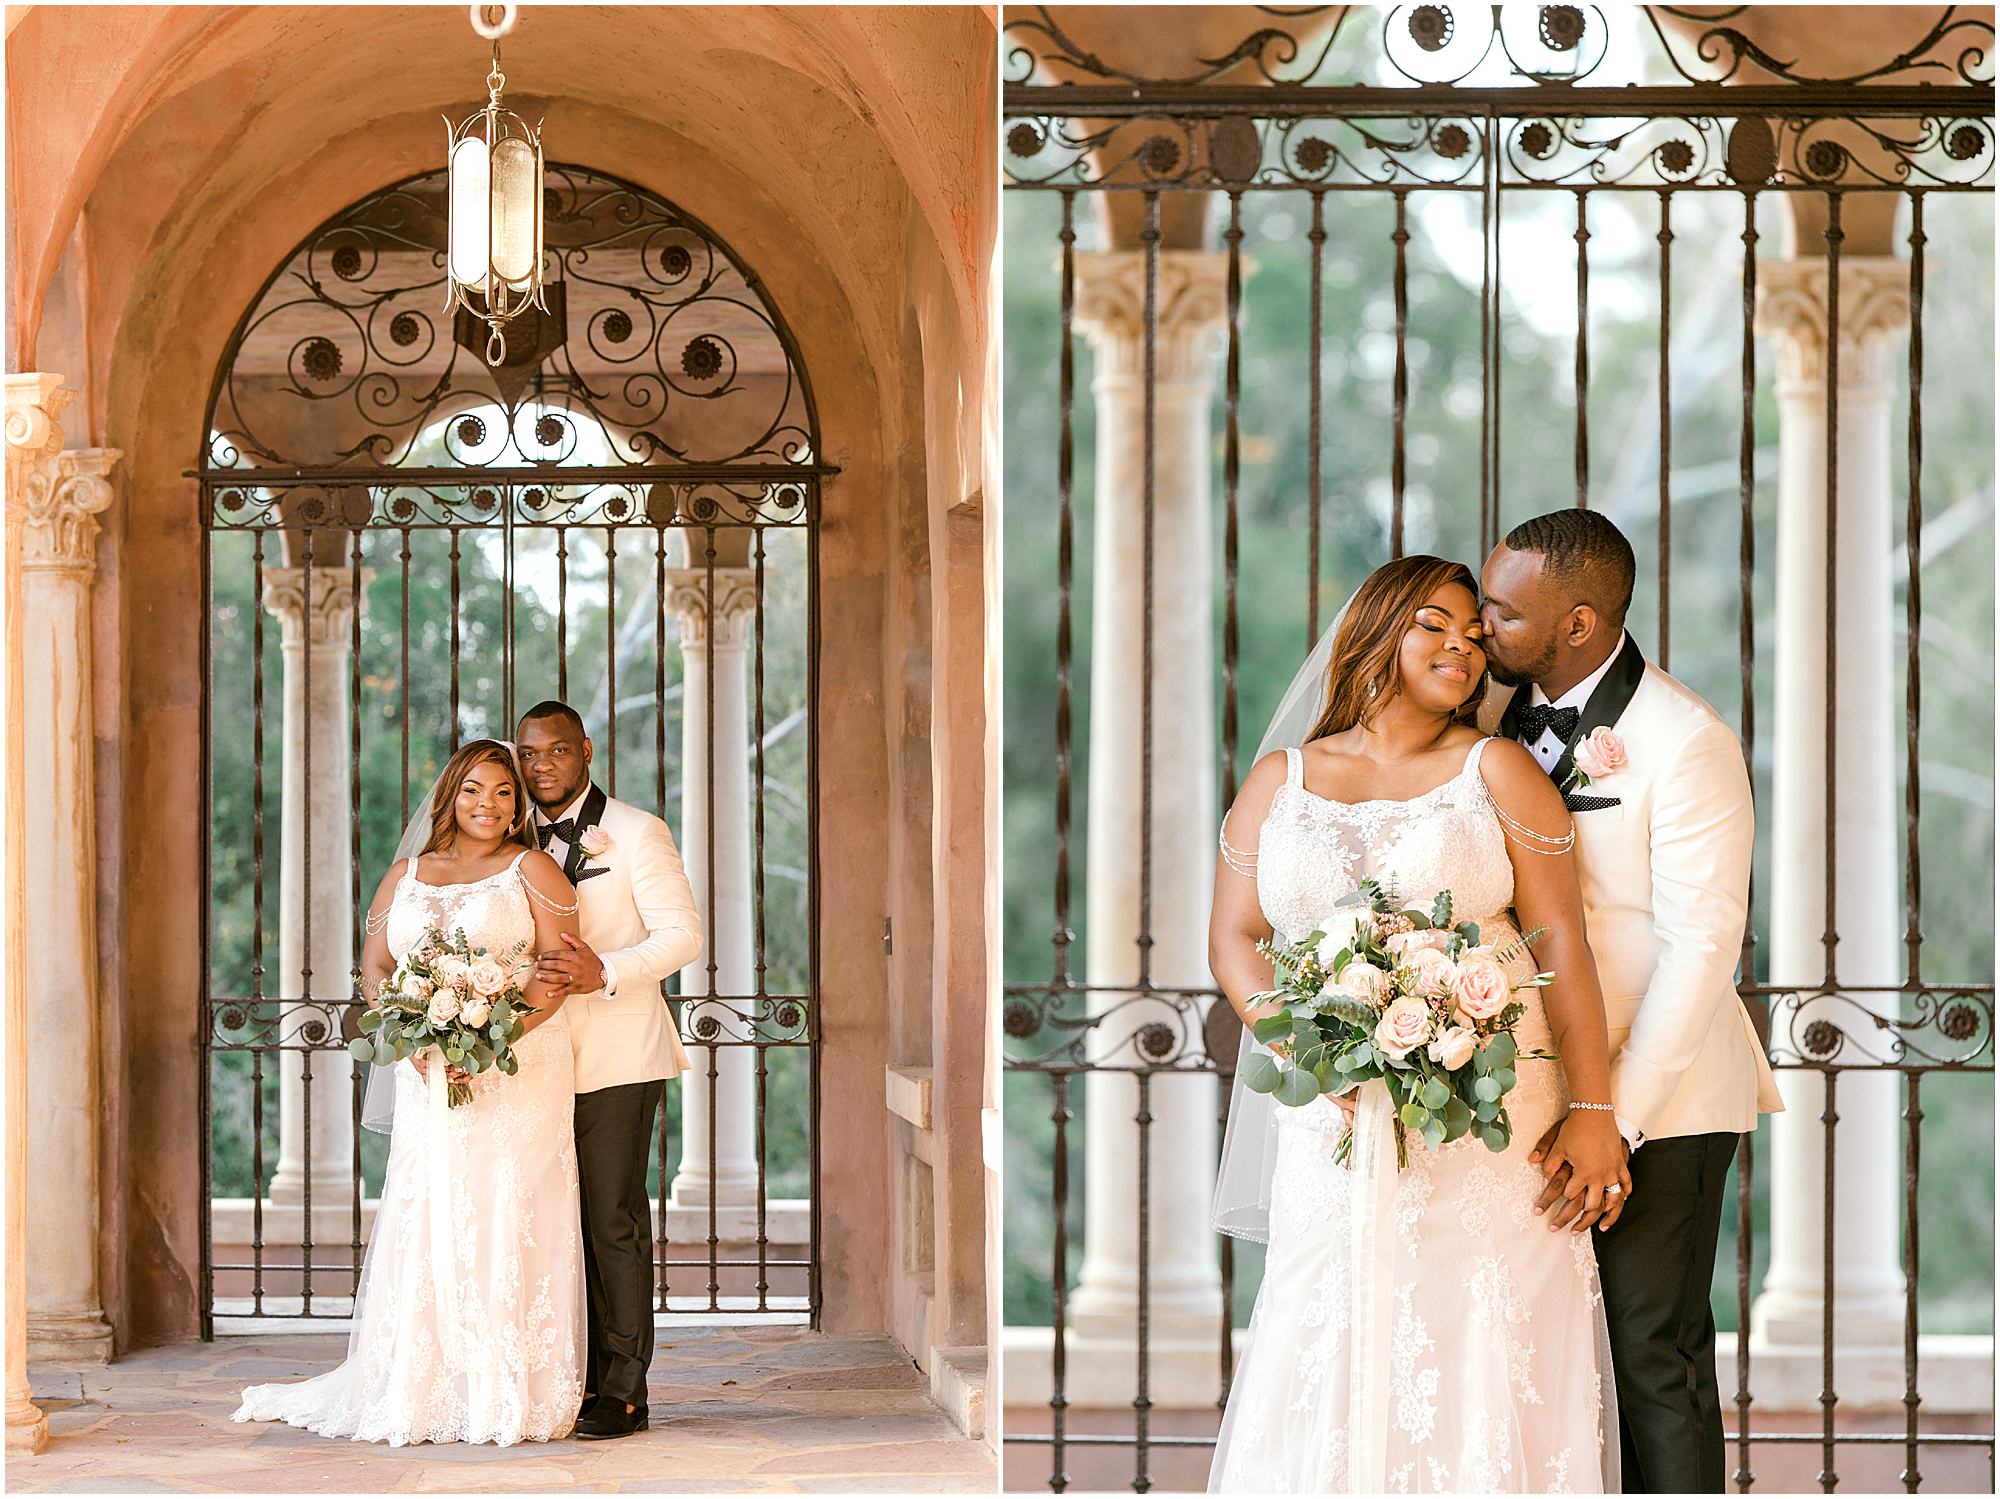 Bride and groom standing in front of antique iron gates